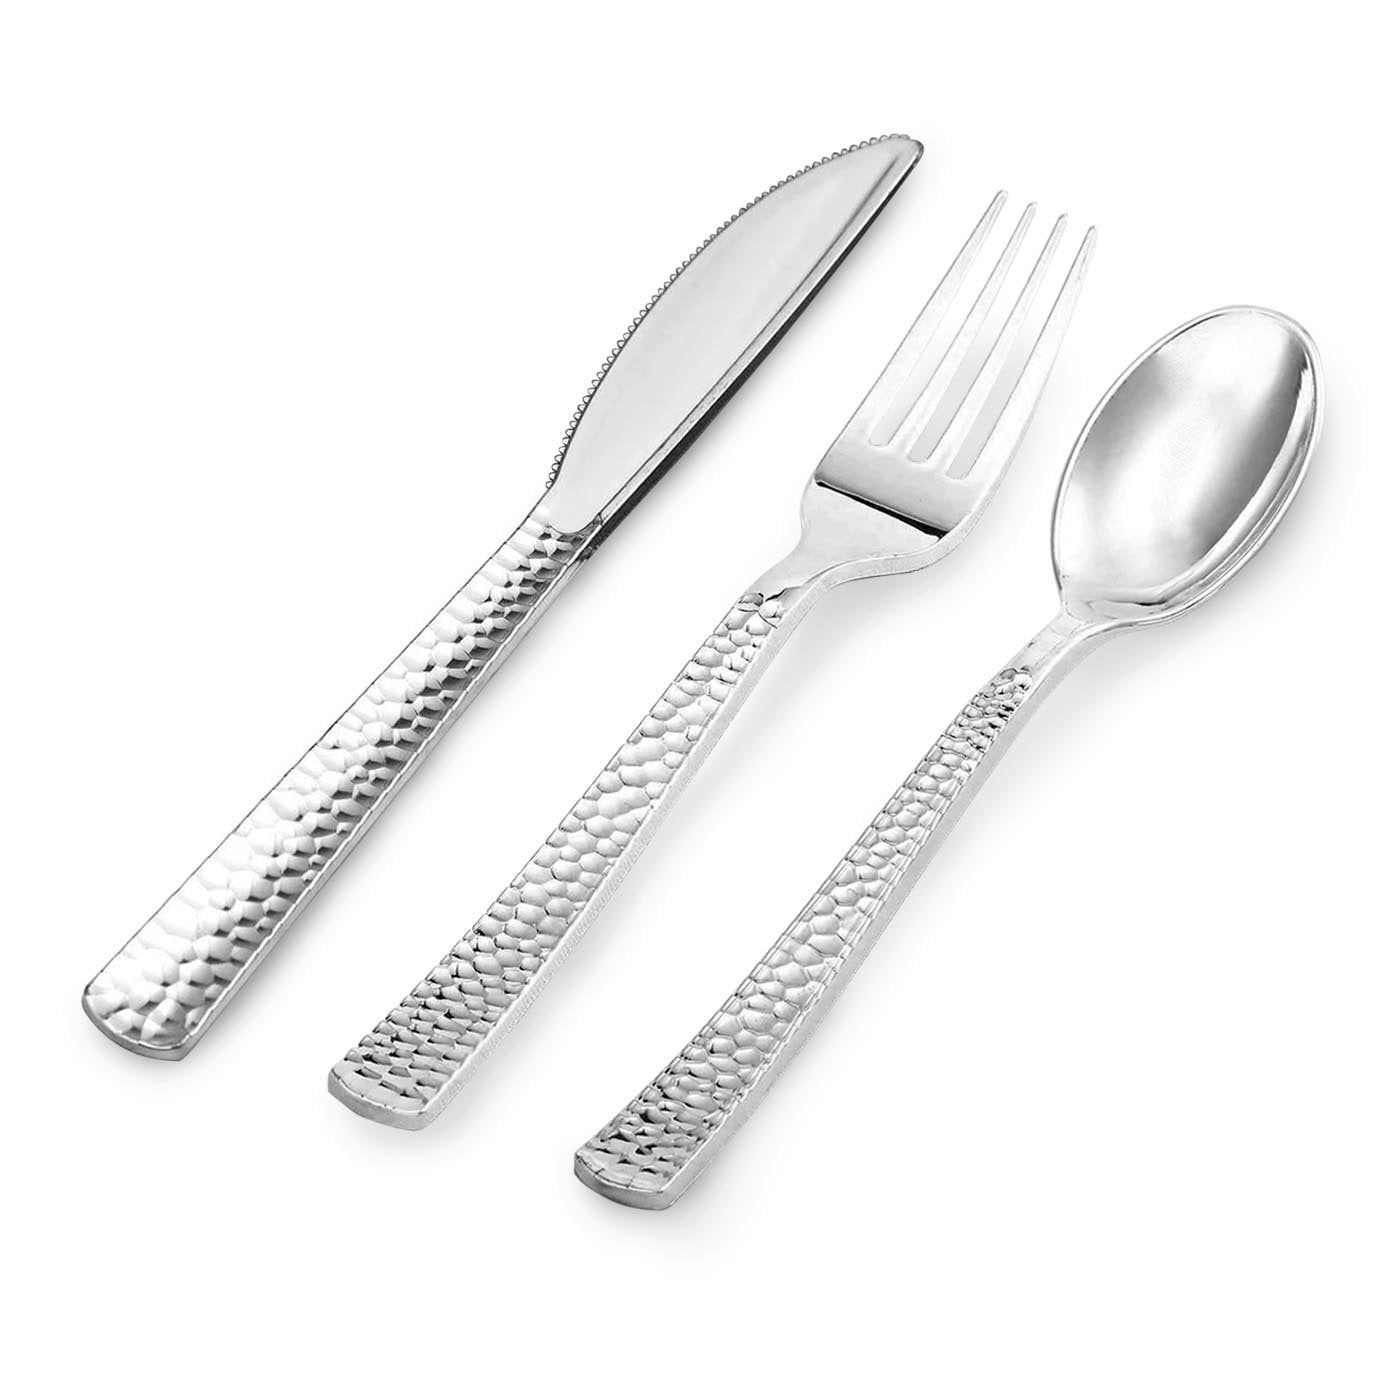 Shiny Metallic Silver Hammered Plastic Cutlery Set (1000 Guests)